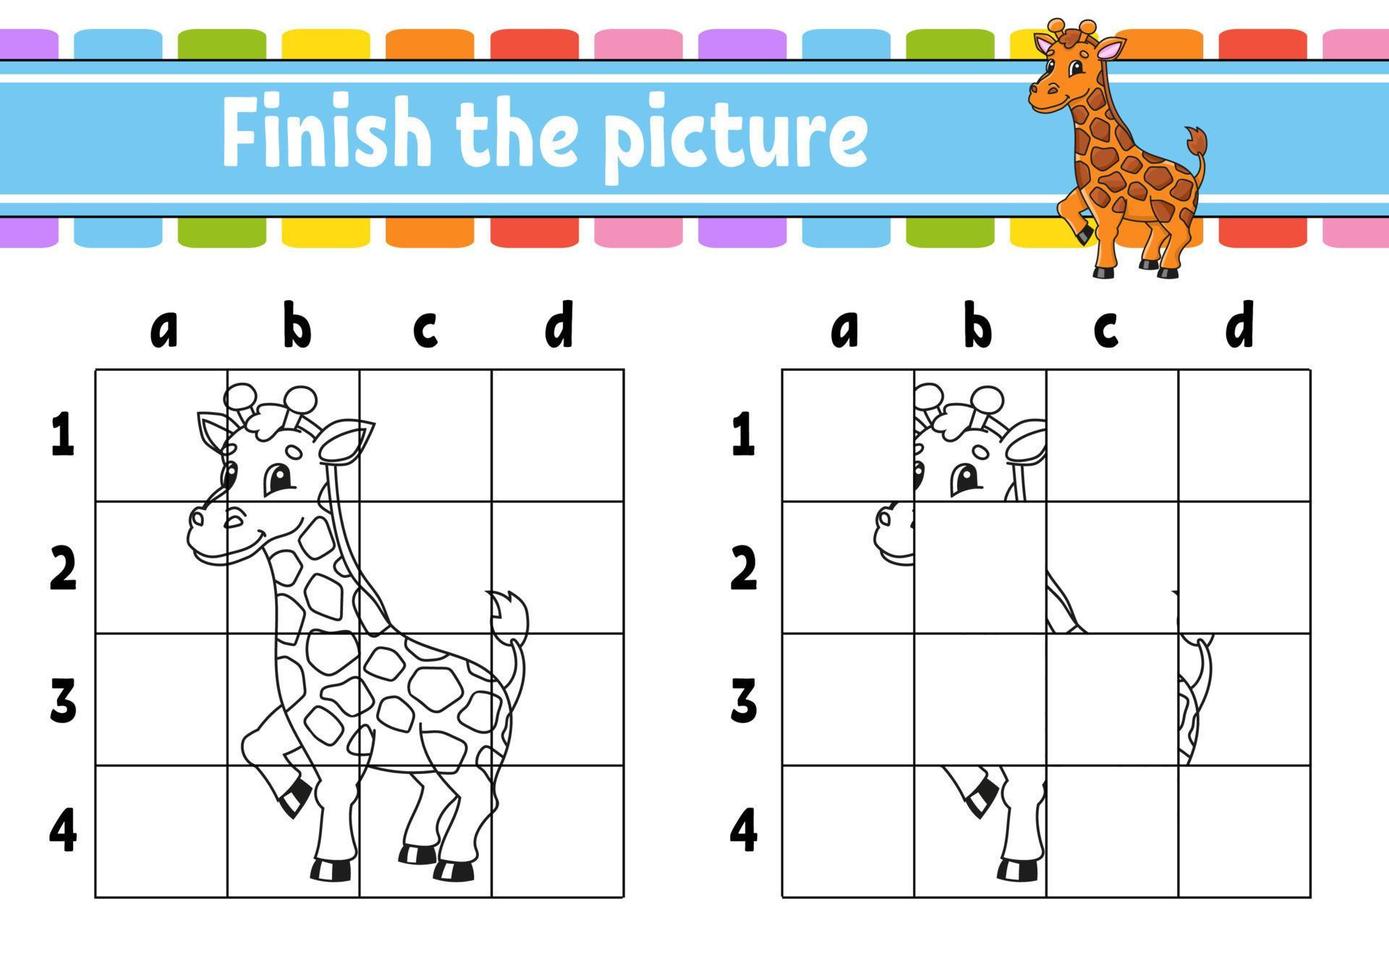 Finish the picture. Giraffe animal. Coloring book pages for kids. Education developing worksheet. Game for children. Handwriting practice. Coon character. Vector illustration.